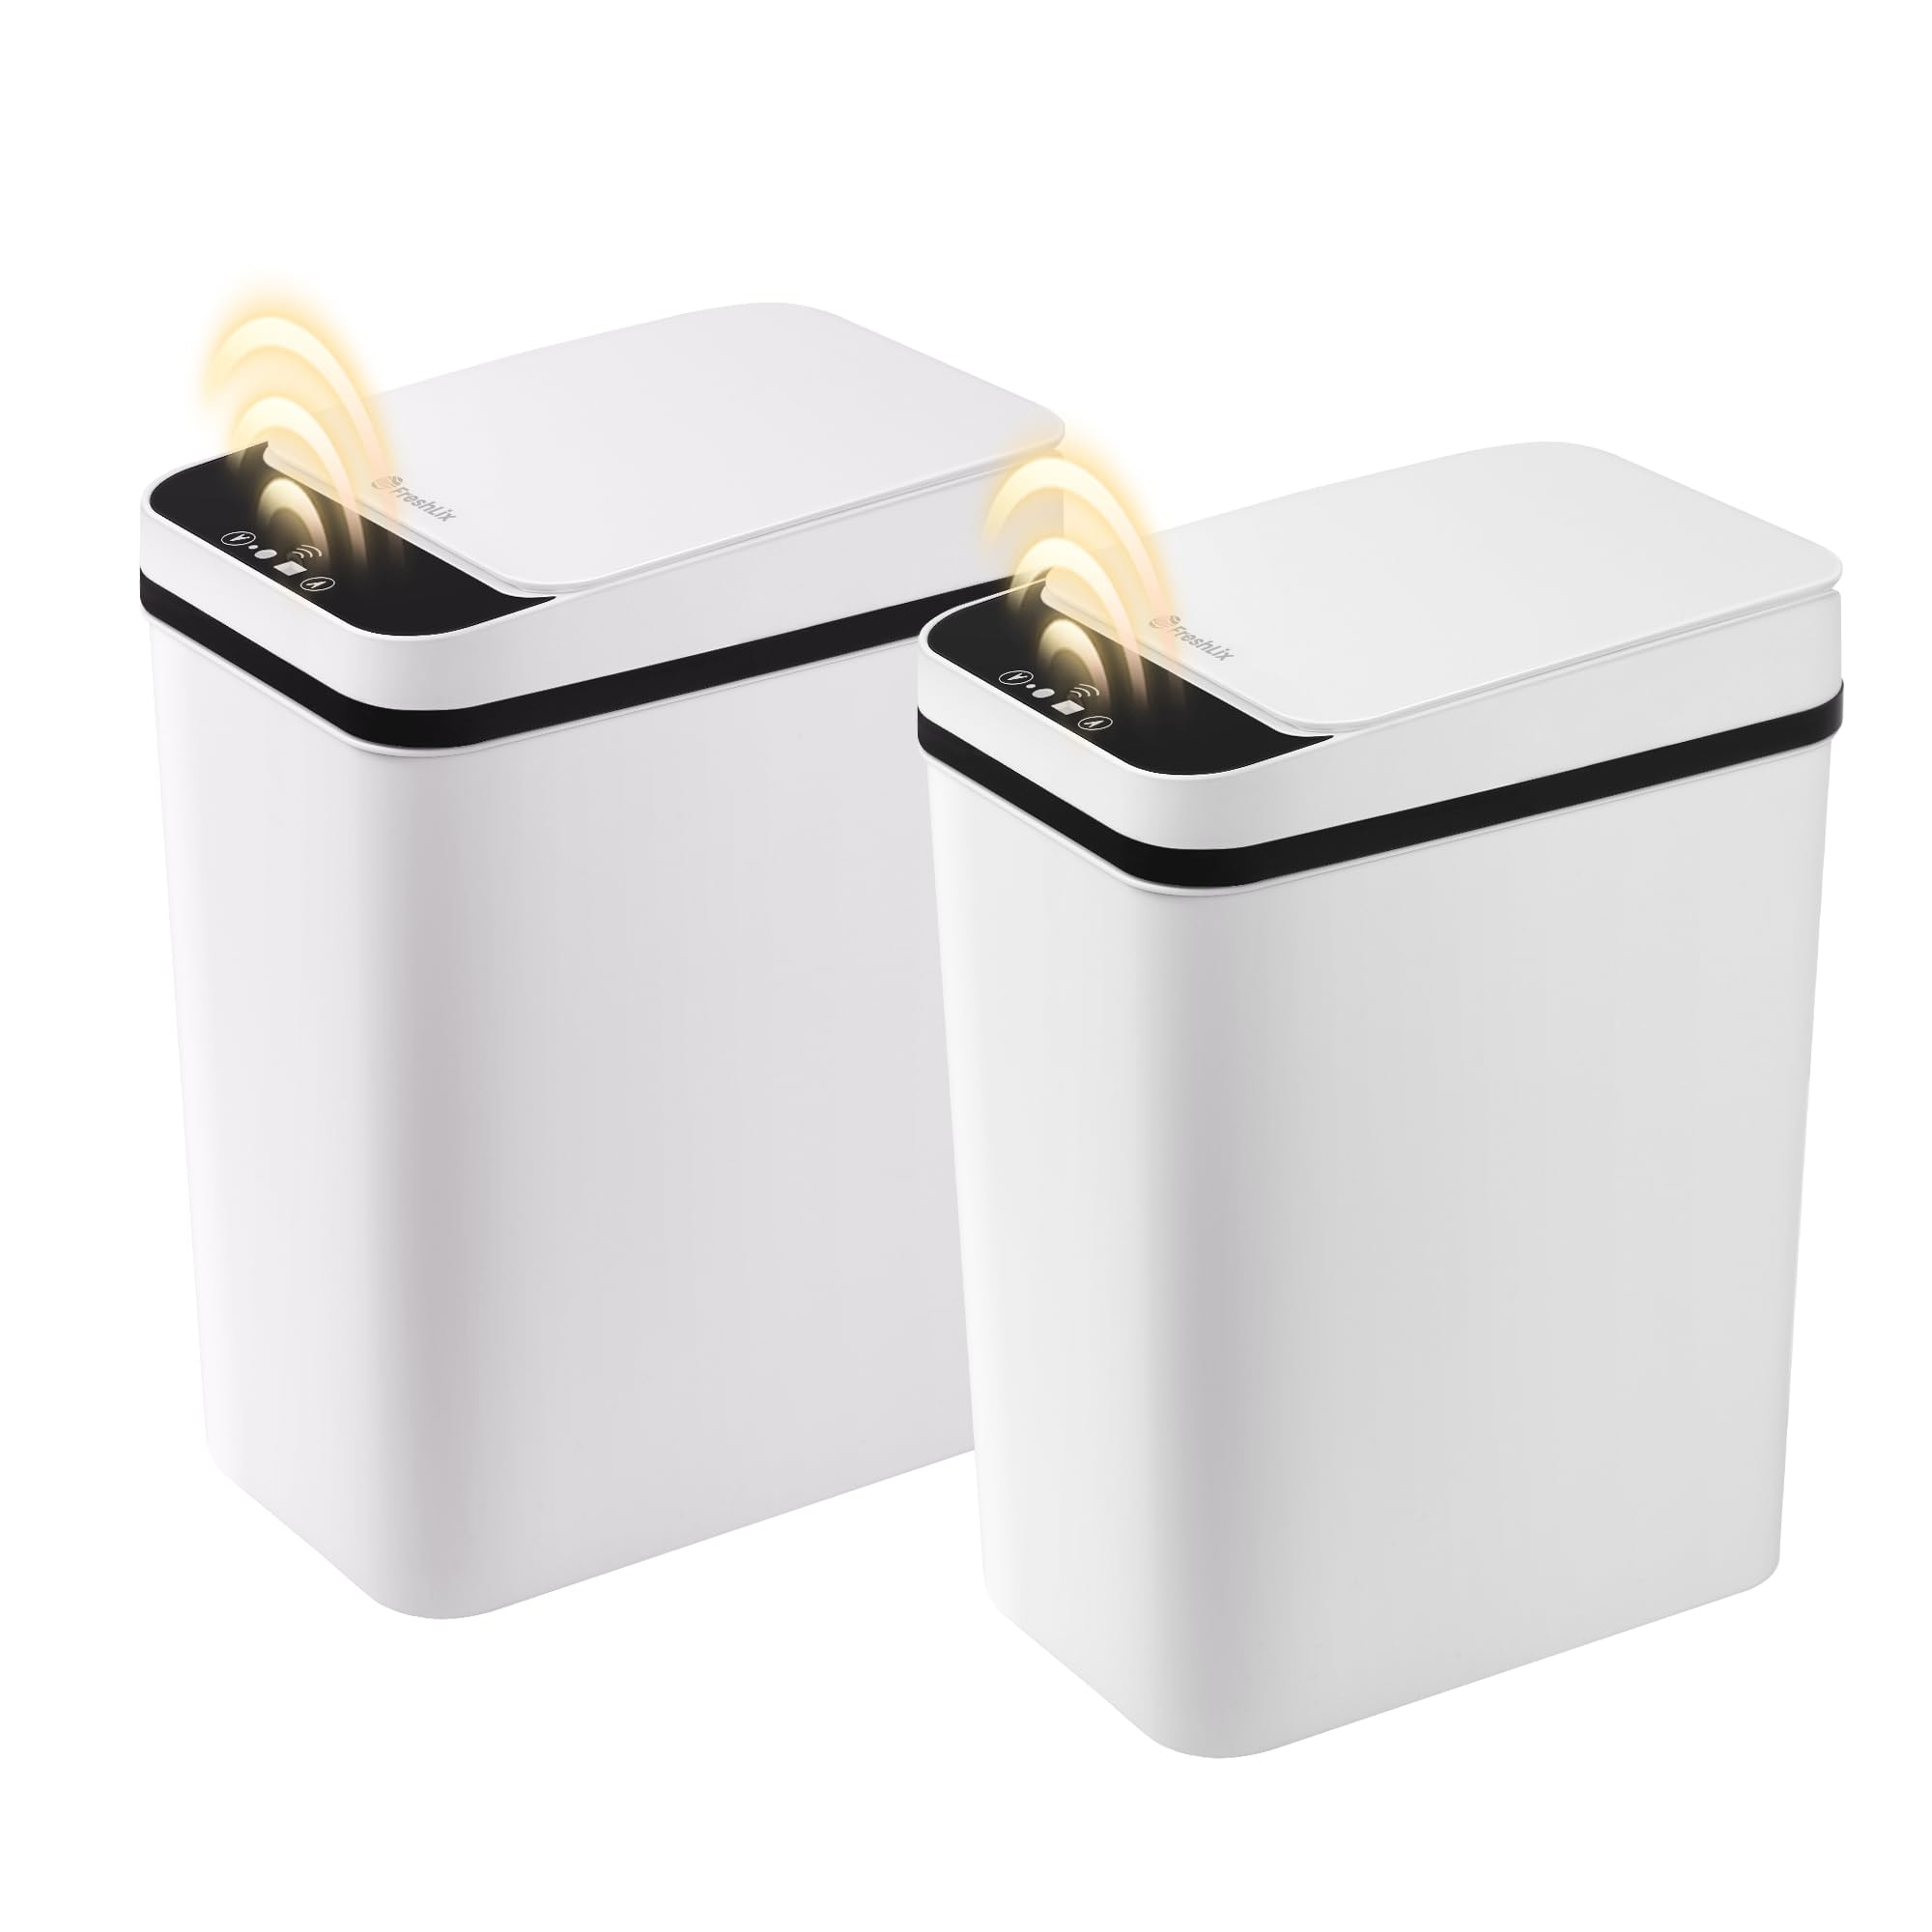 https://ak1.ostkcdn.com/images/products/is/images/direct/e59302e1879ef3db725123cad89b7b74a9527ba0/2Pcs-Smart-Touchless-Trash-Can%2C-2.6-Gallon-Automatic-Motion-Sensor-Rubbish-Can-with-Lid%2C-Electric-Narrow-Small-Garbage-Bin.jpg